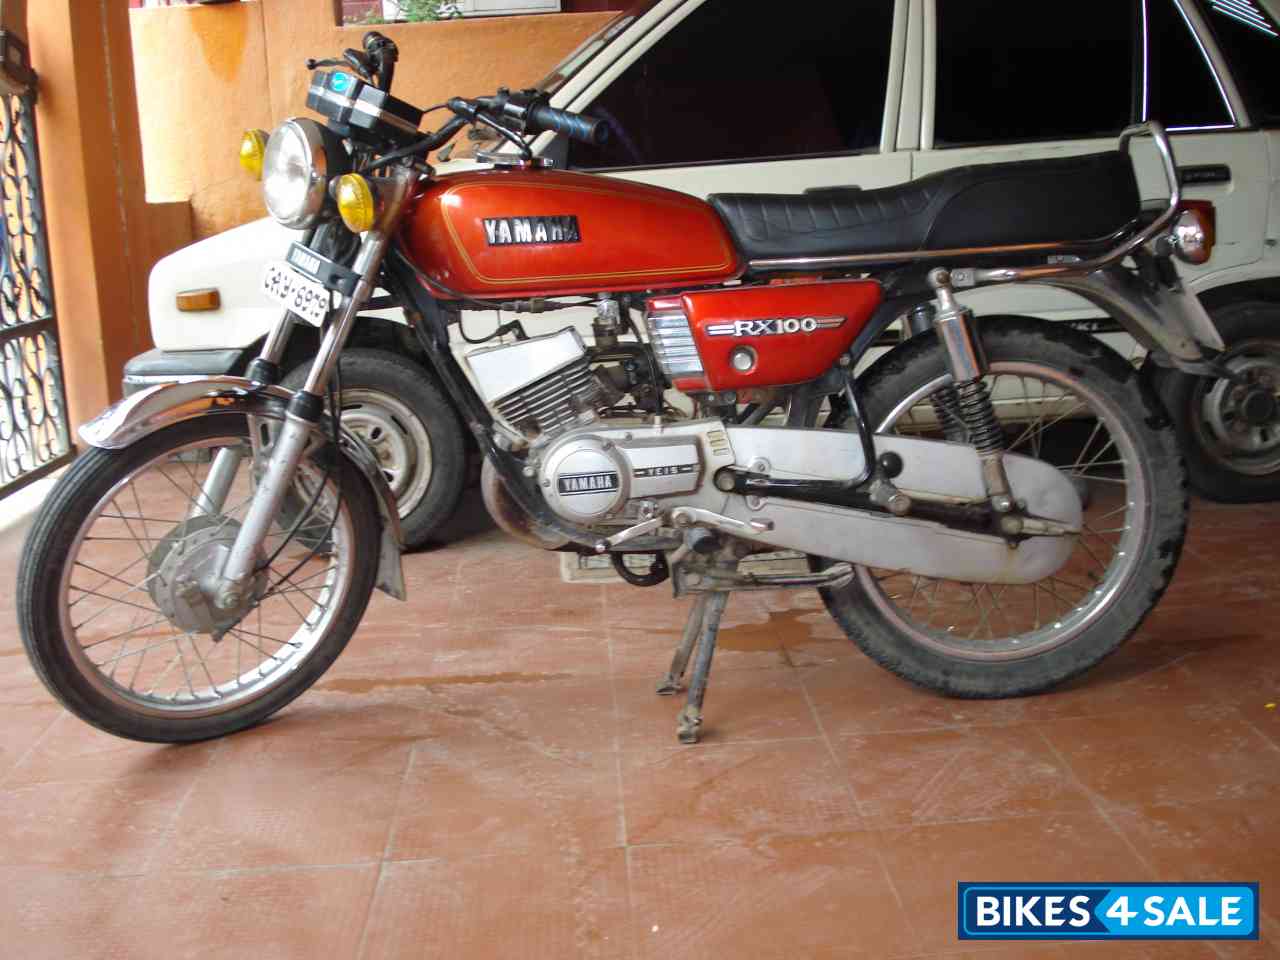 Used 1988 Model Yamaha Rx 100 For Sale In Bangalore Id 27491 Red